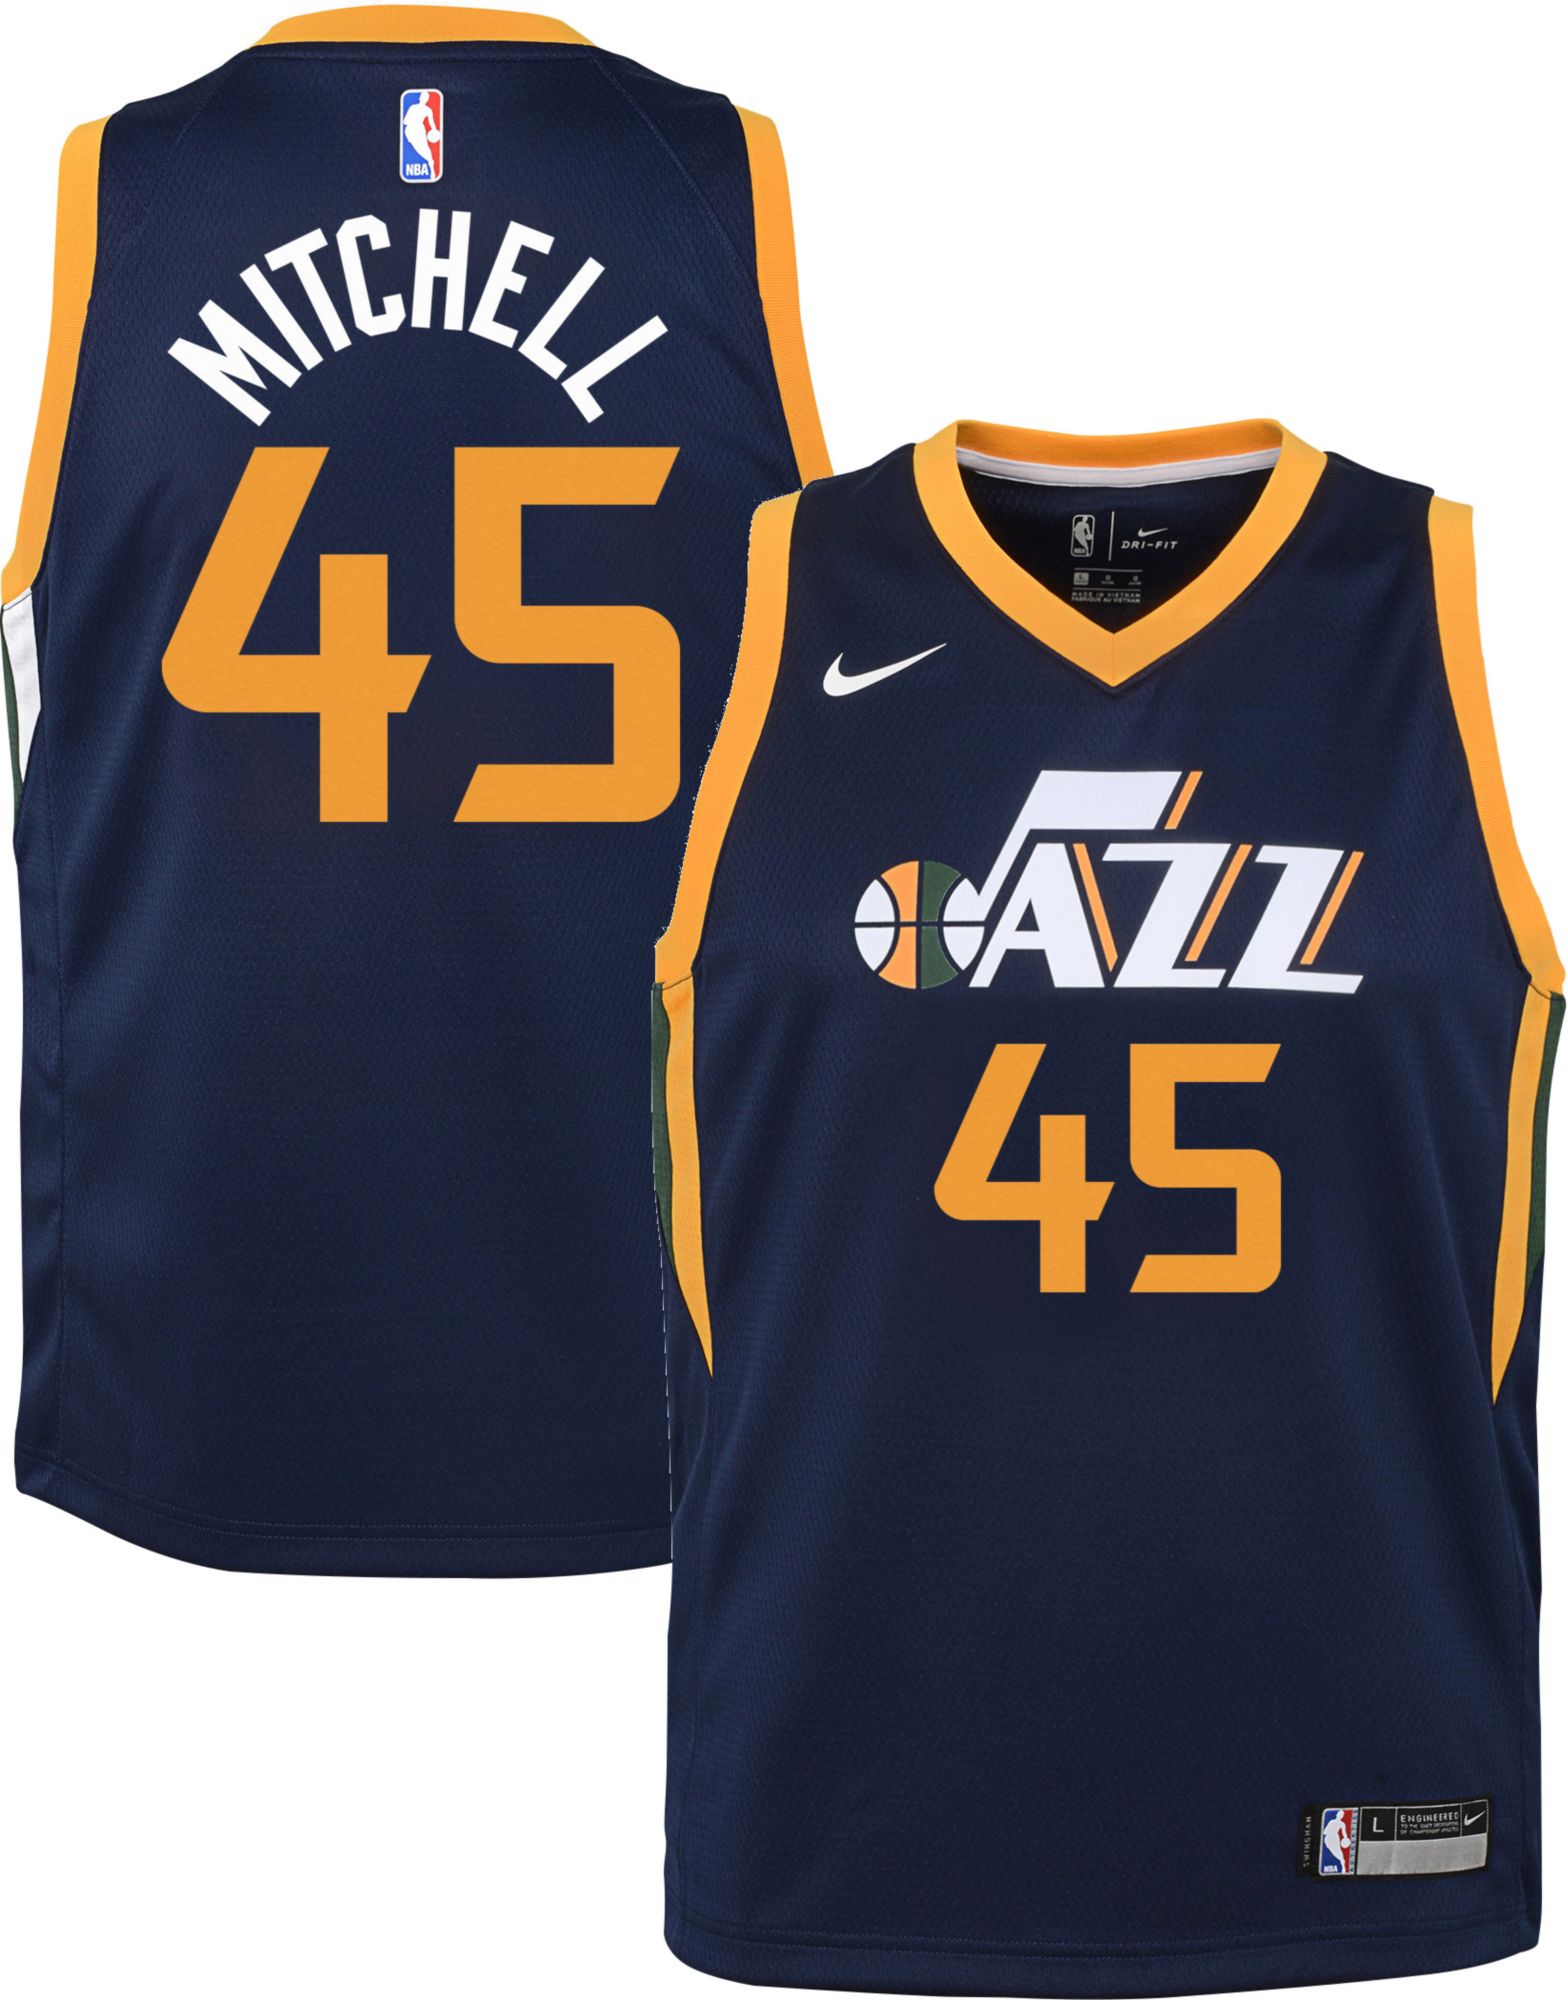 donovan mitchell jersey youth